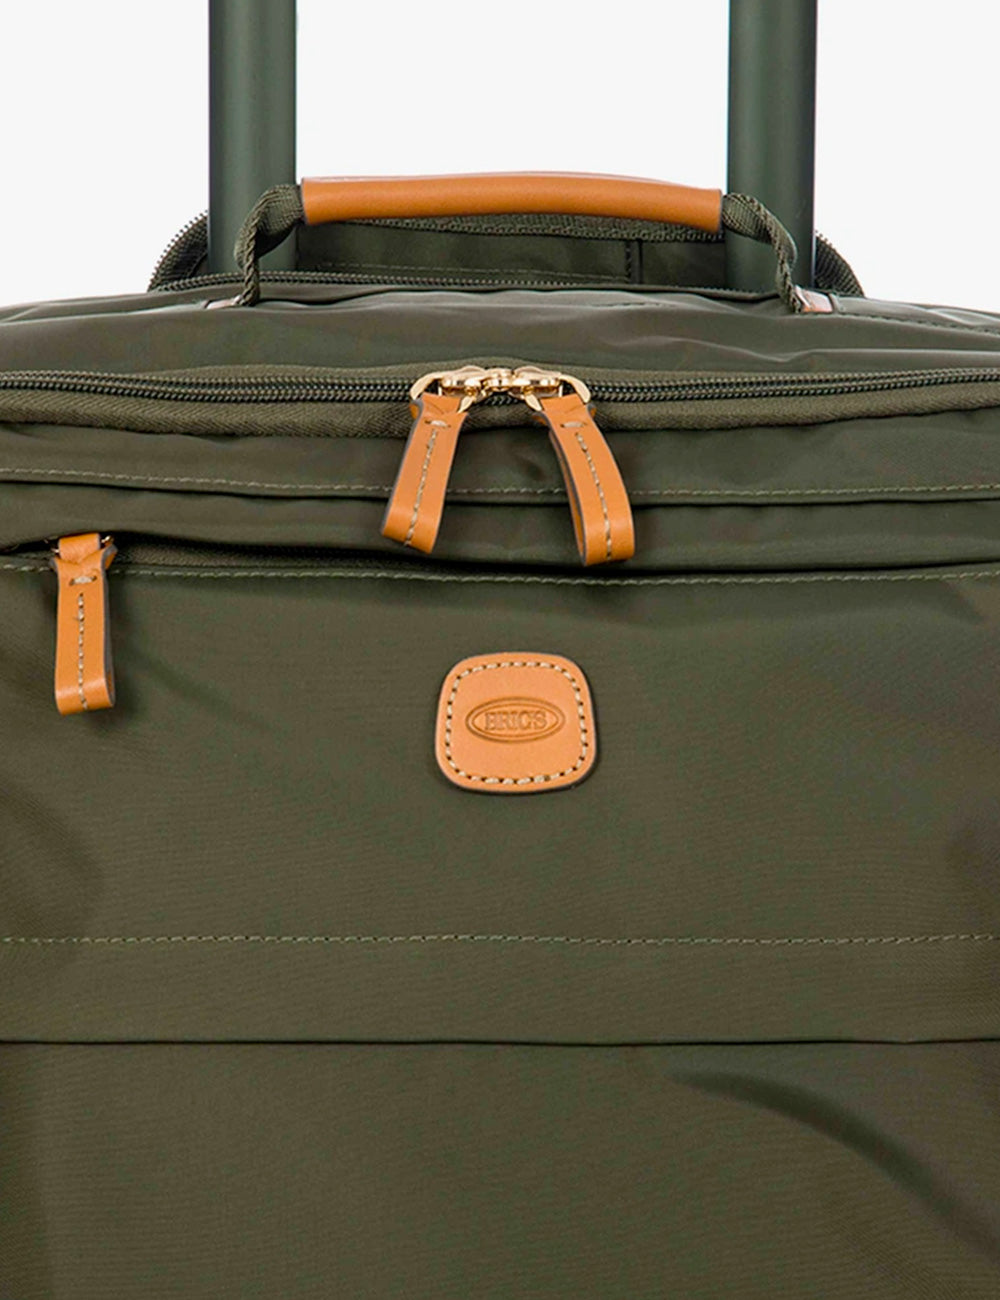 Bric's Trolley X Collection Soft Olive